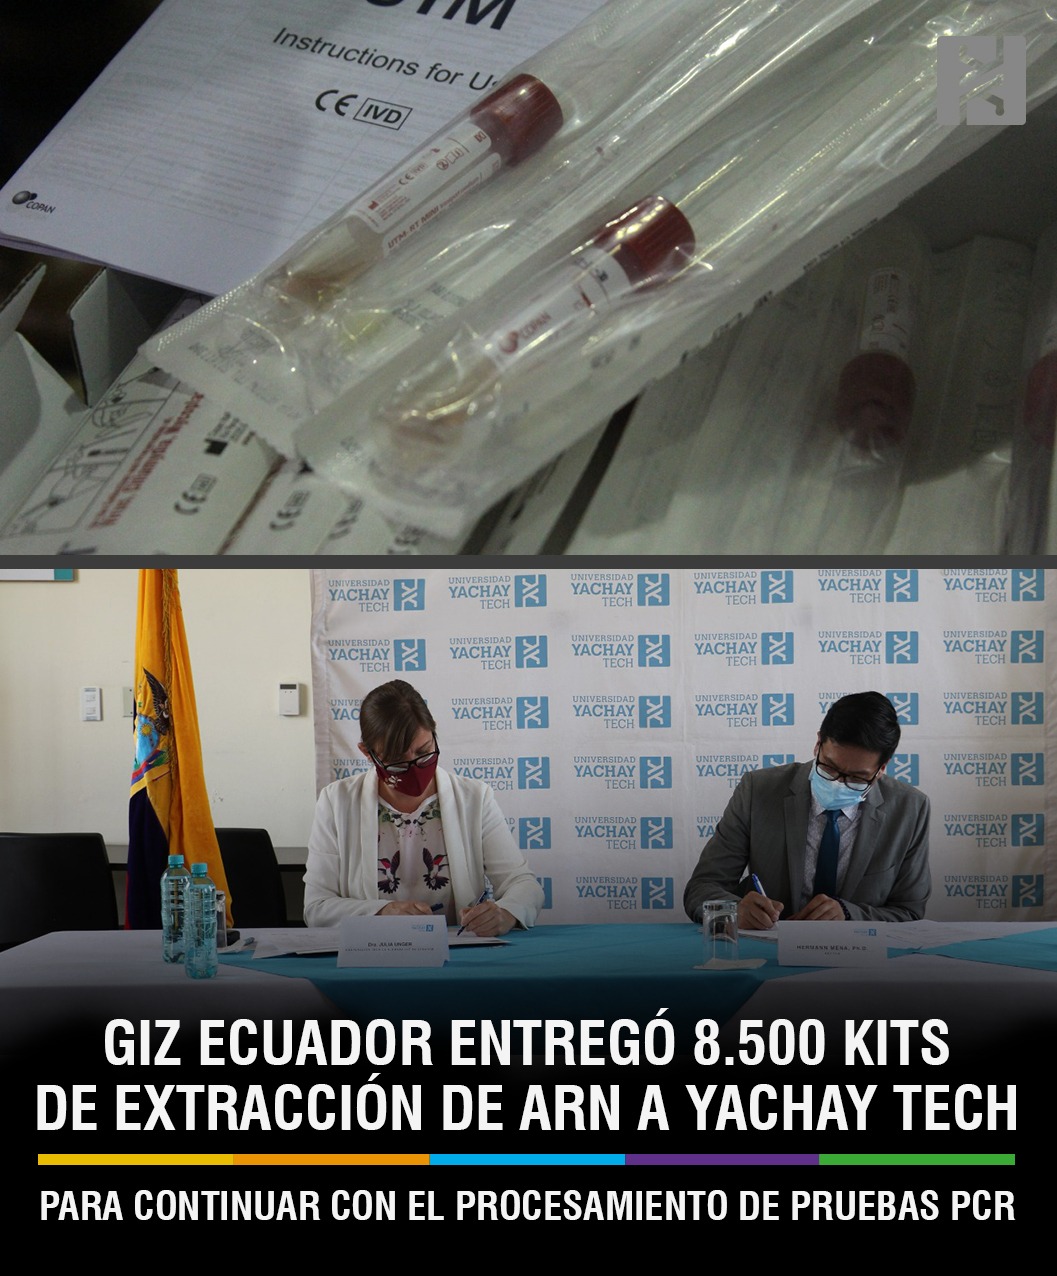 GIZ ECUADOR DELIVERED 8.500 RNA EXTRACTION KITS TO YACHAY TECH TO CONTINUE PROCESSING PCR TESTS